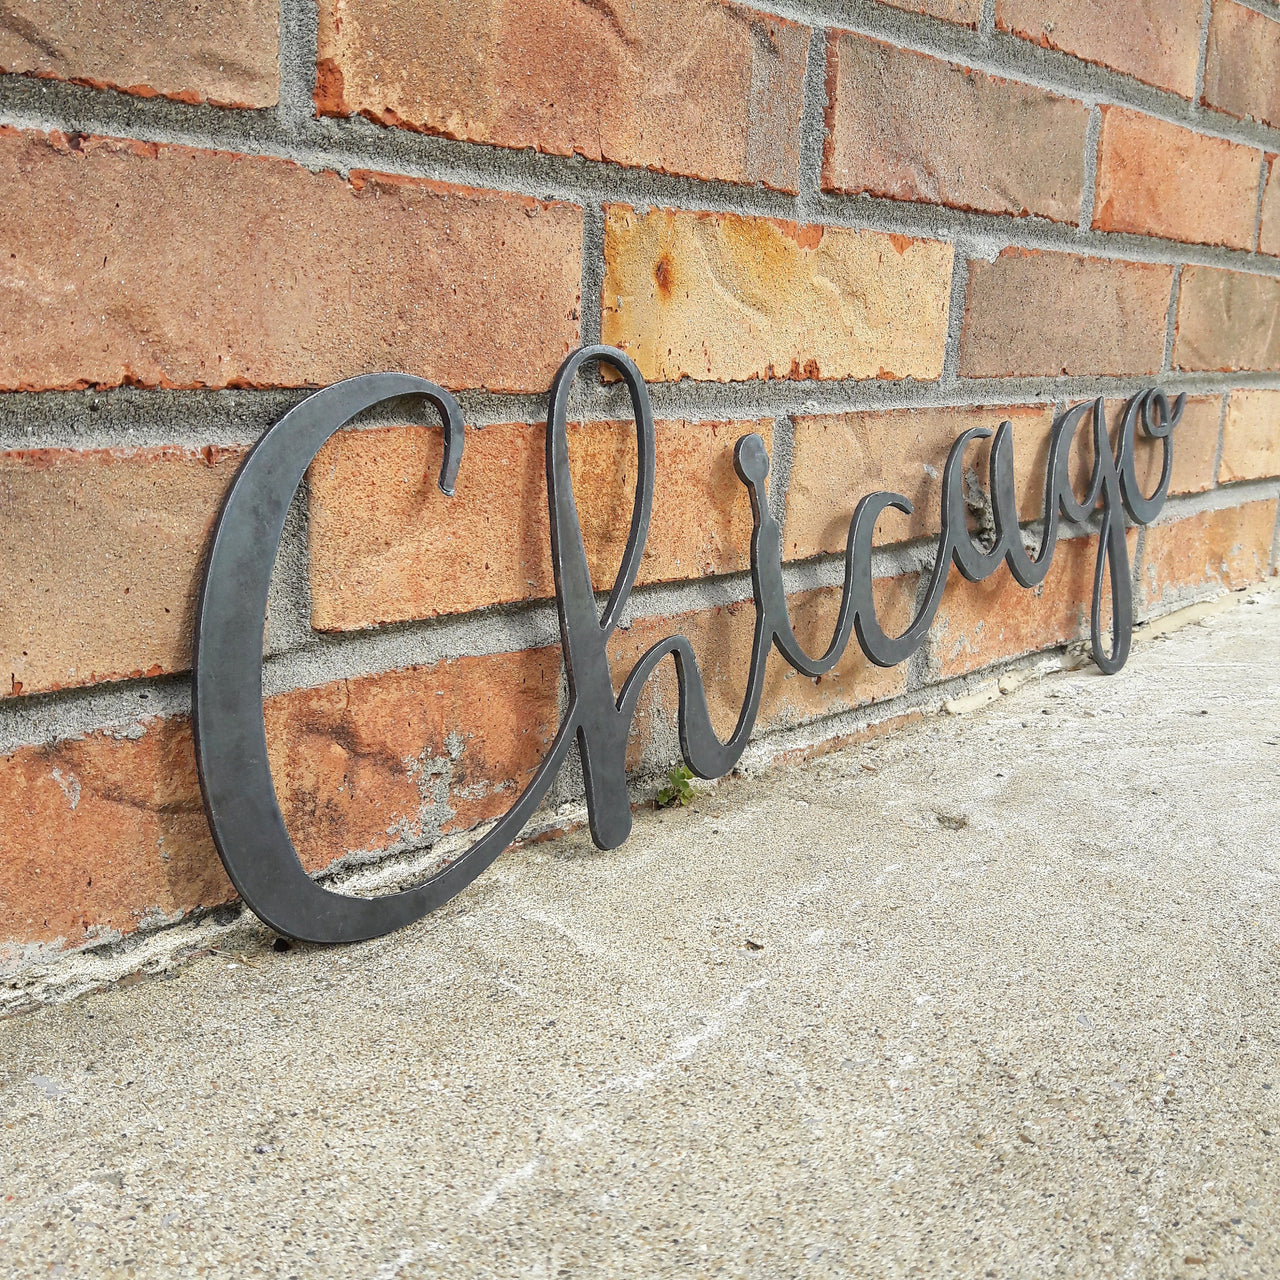 This metal home decor is in the shape of a cursive word and reads, "Chicago".